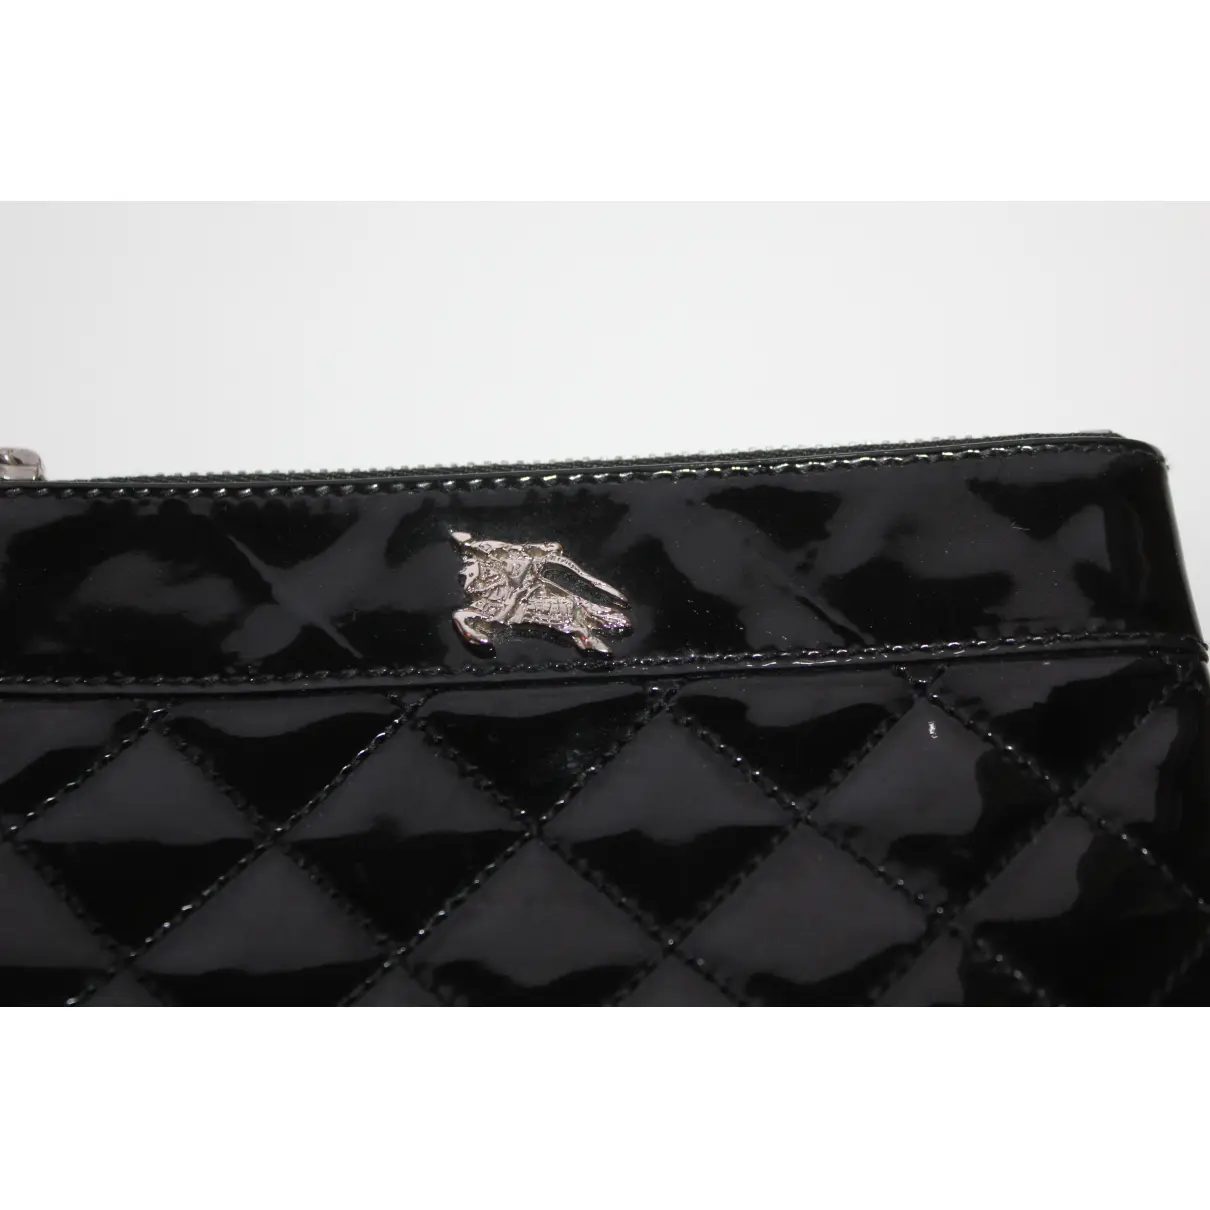 Patent leather clutch bag Burberry